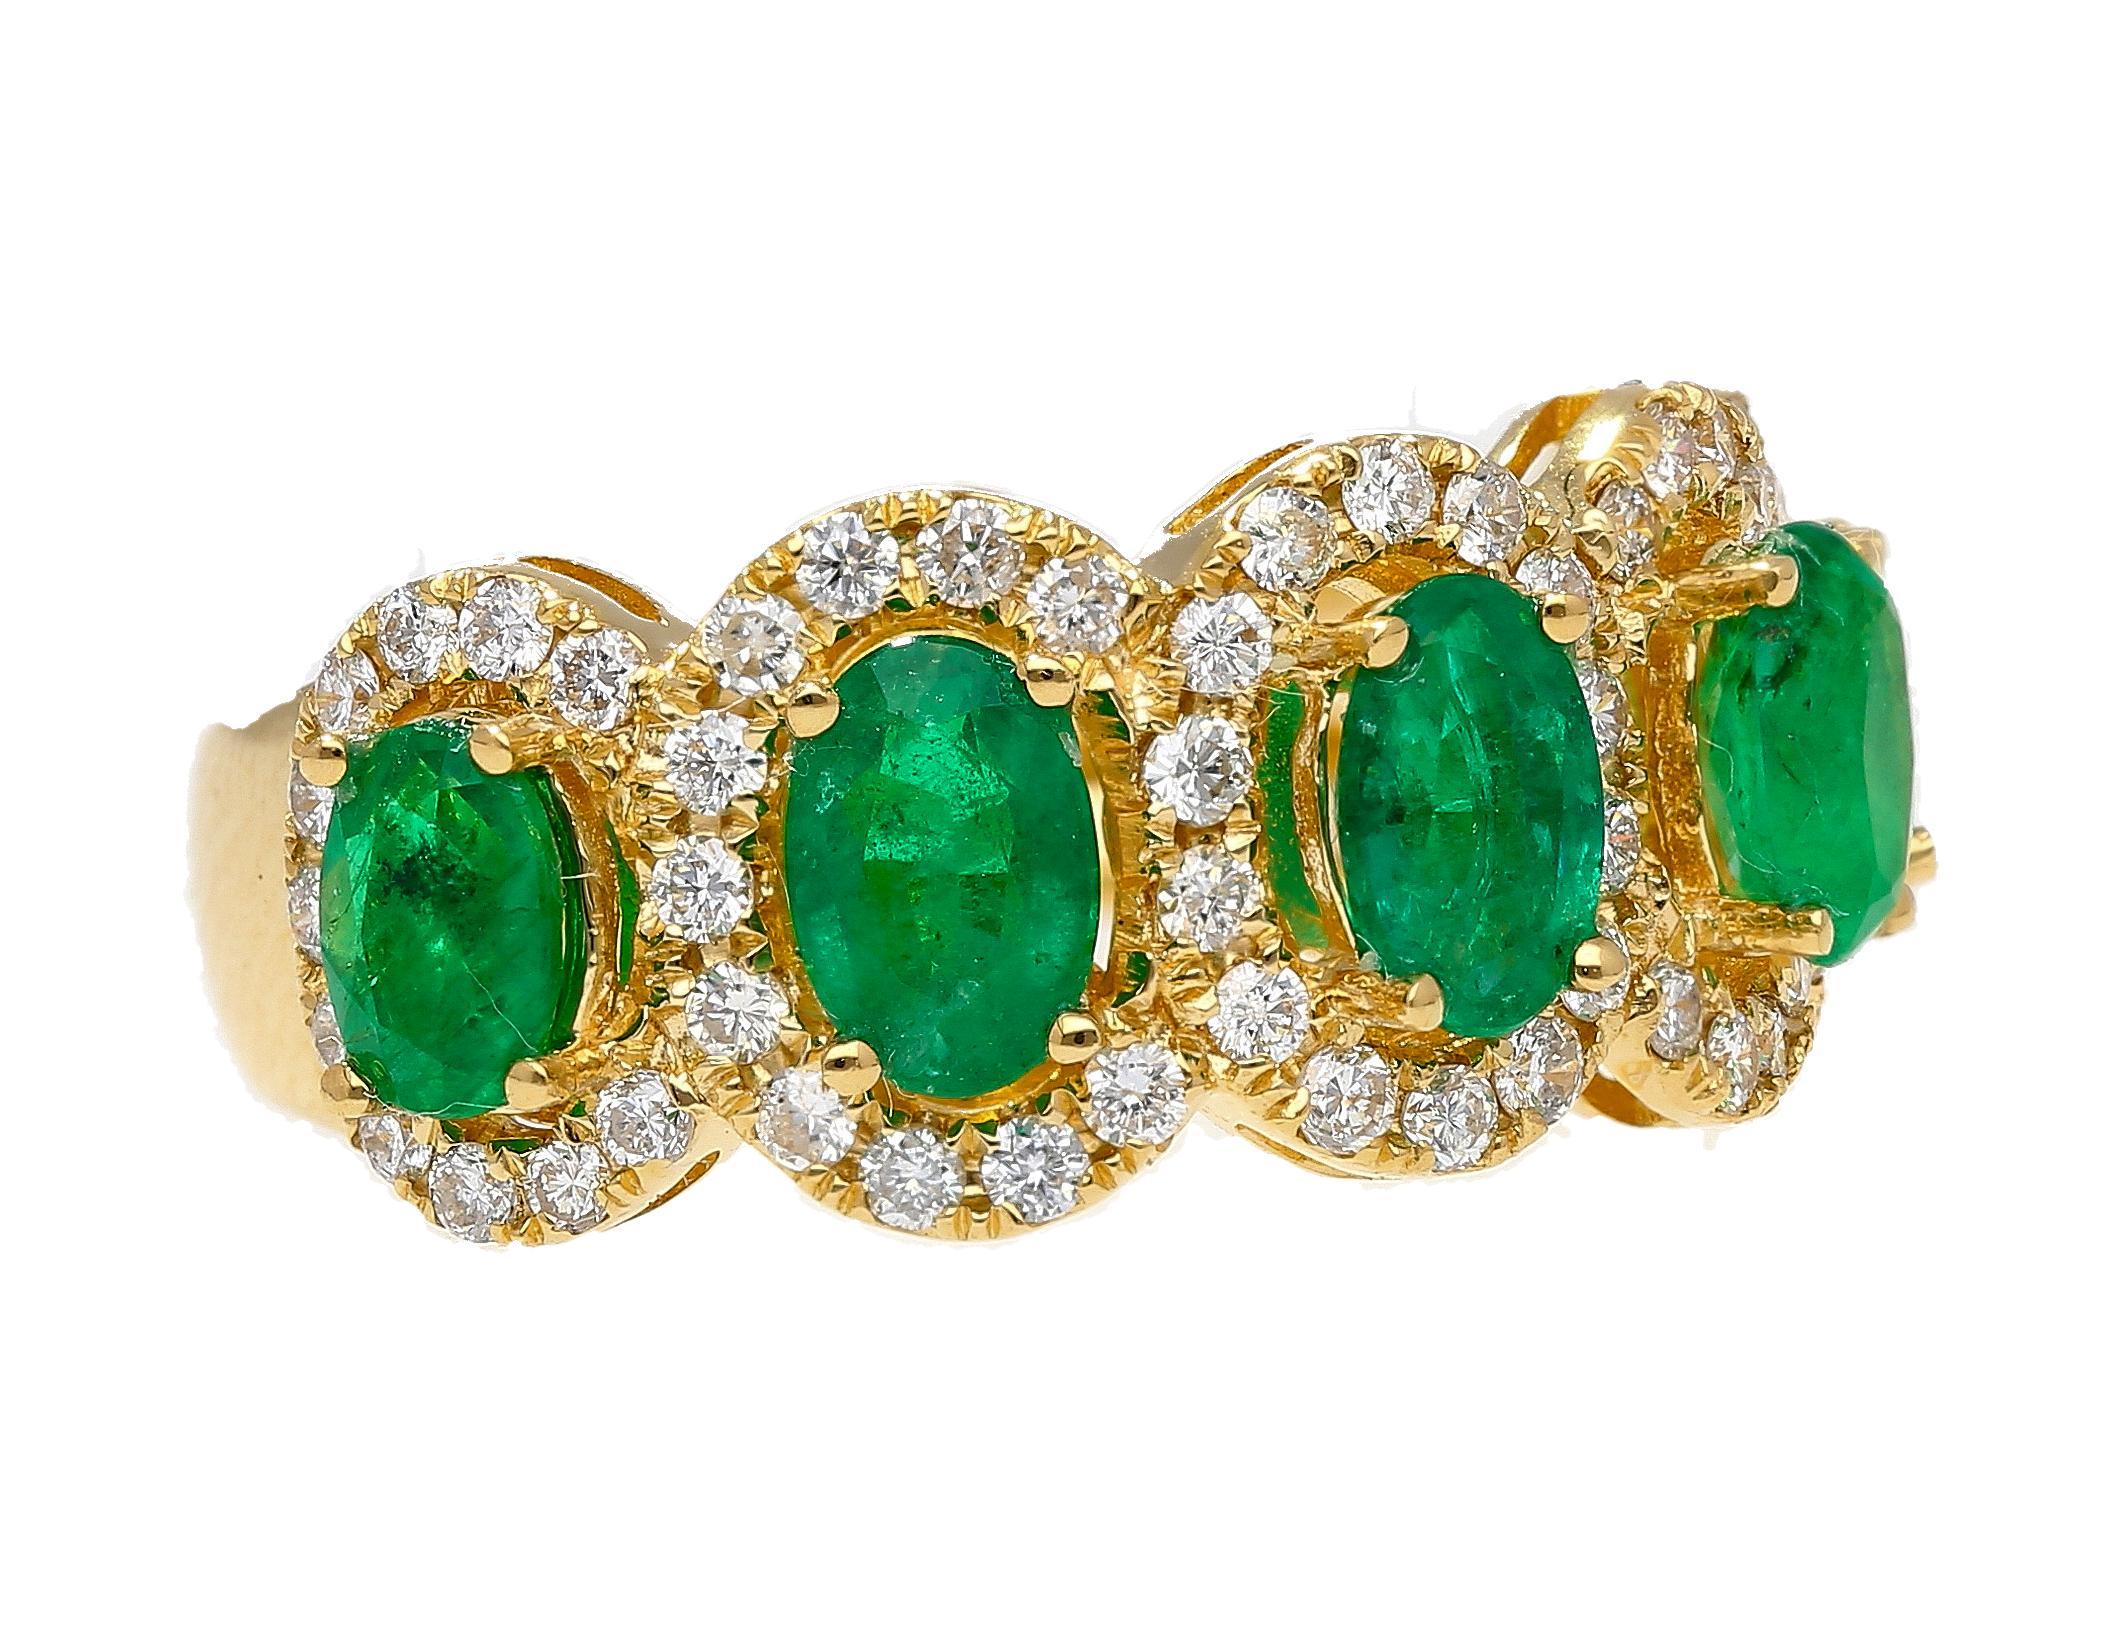 2.11 Carat Oval Cut Emerald and Diamond Wedding Band in 18K Gold For Sale 2